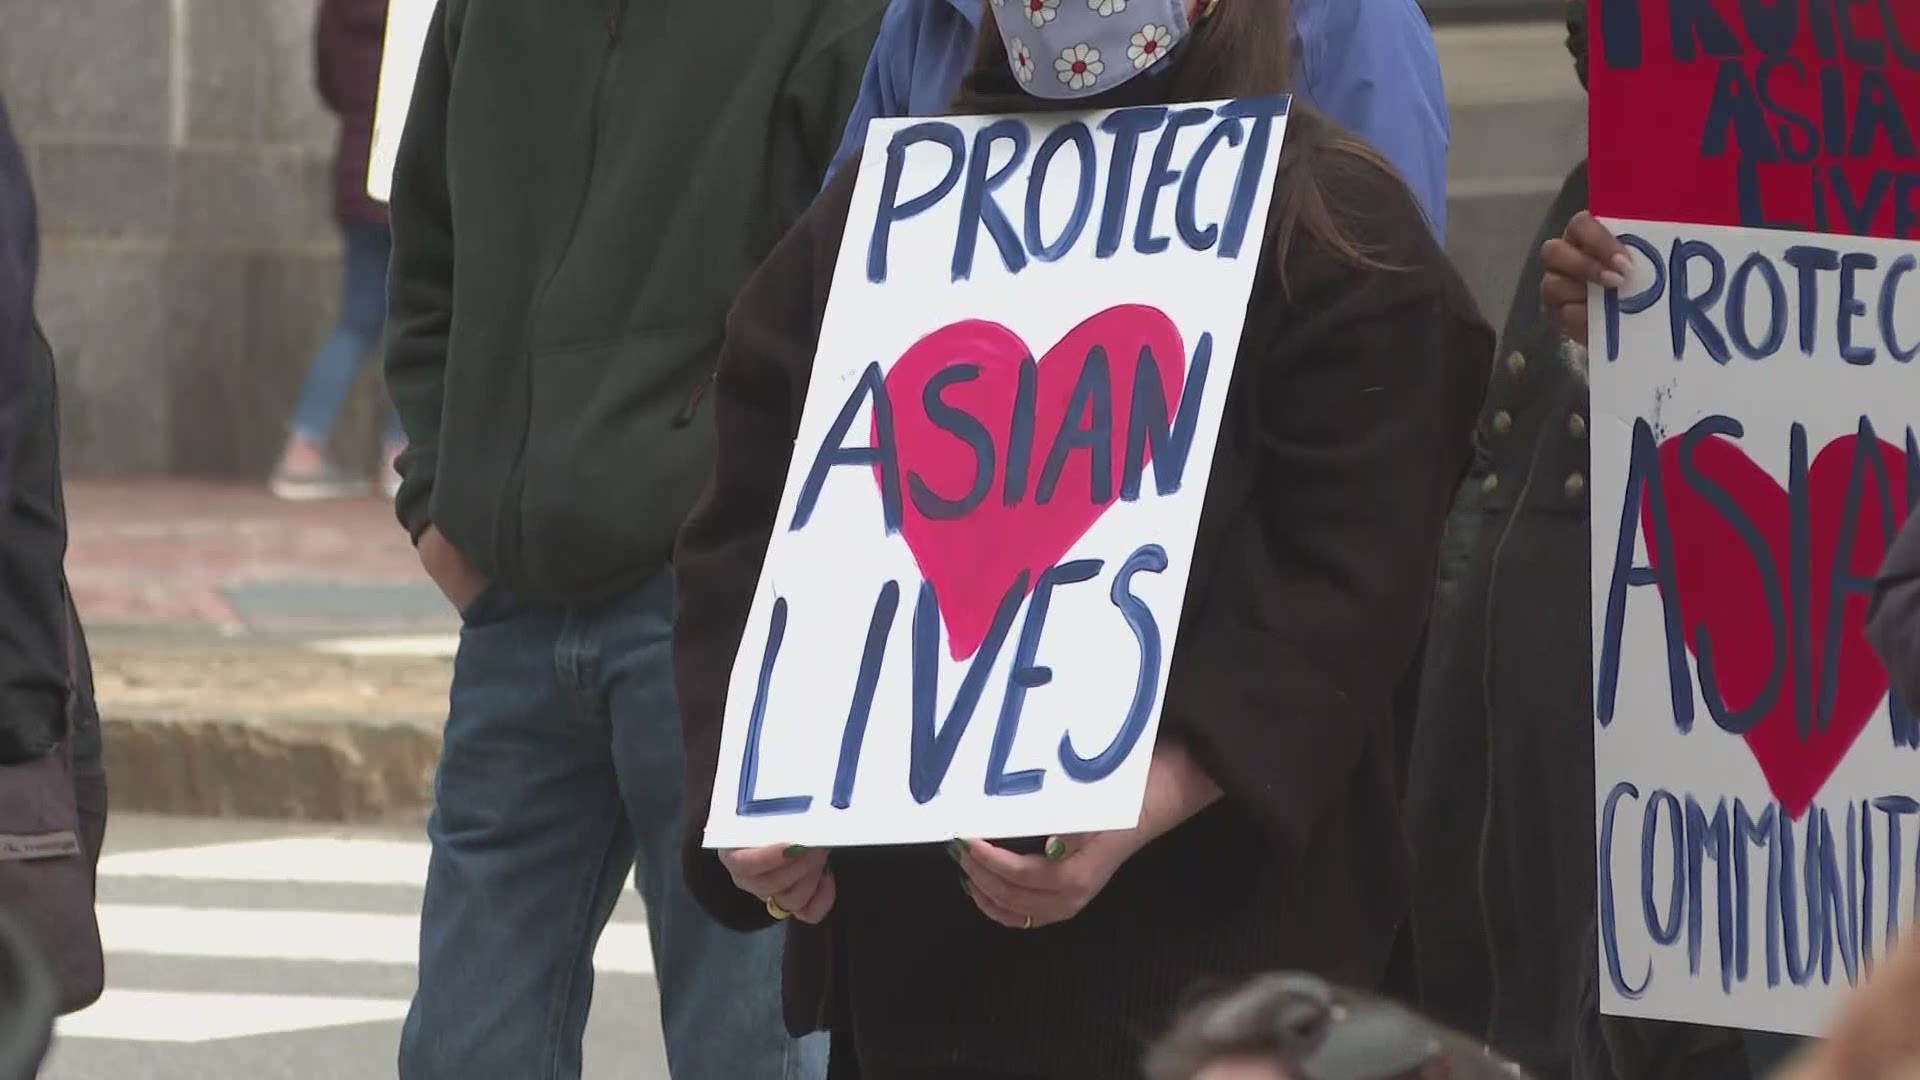 Community leaders and others gathered in front of Portland City Hall on Saturday to discuss their experiences as Asian Americans in the U.S.